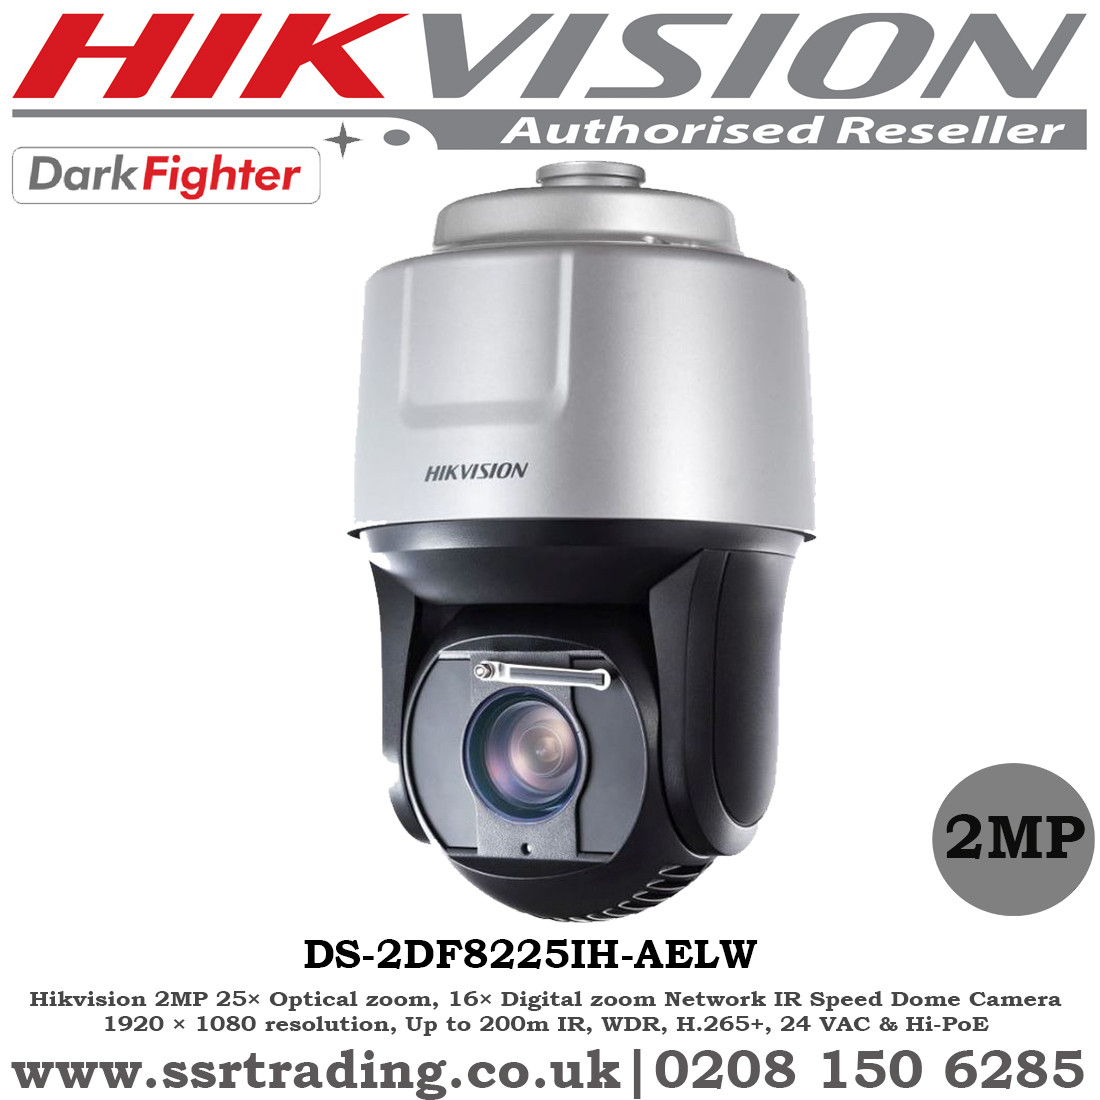 hikvision ivms 4200 client